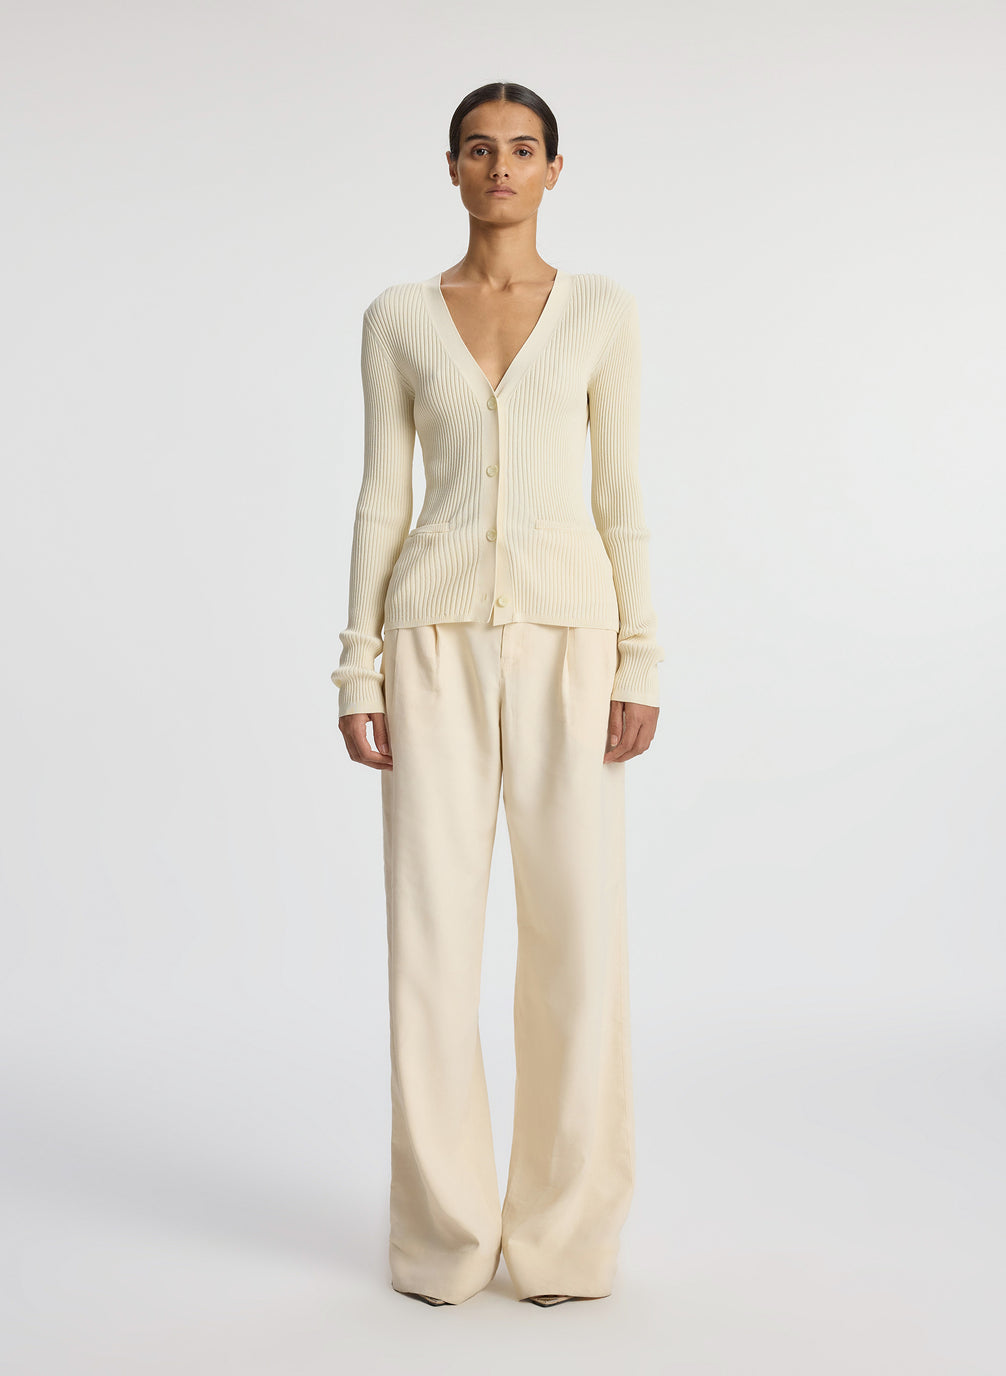 front view of woman wearing cream cardigan and beige pants